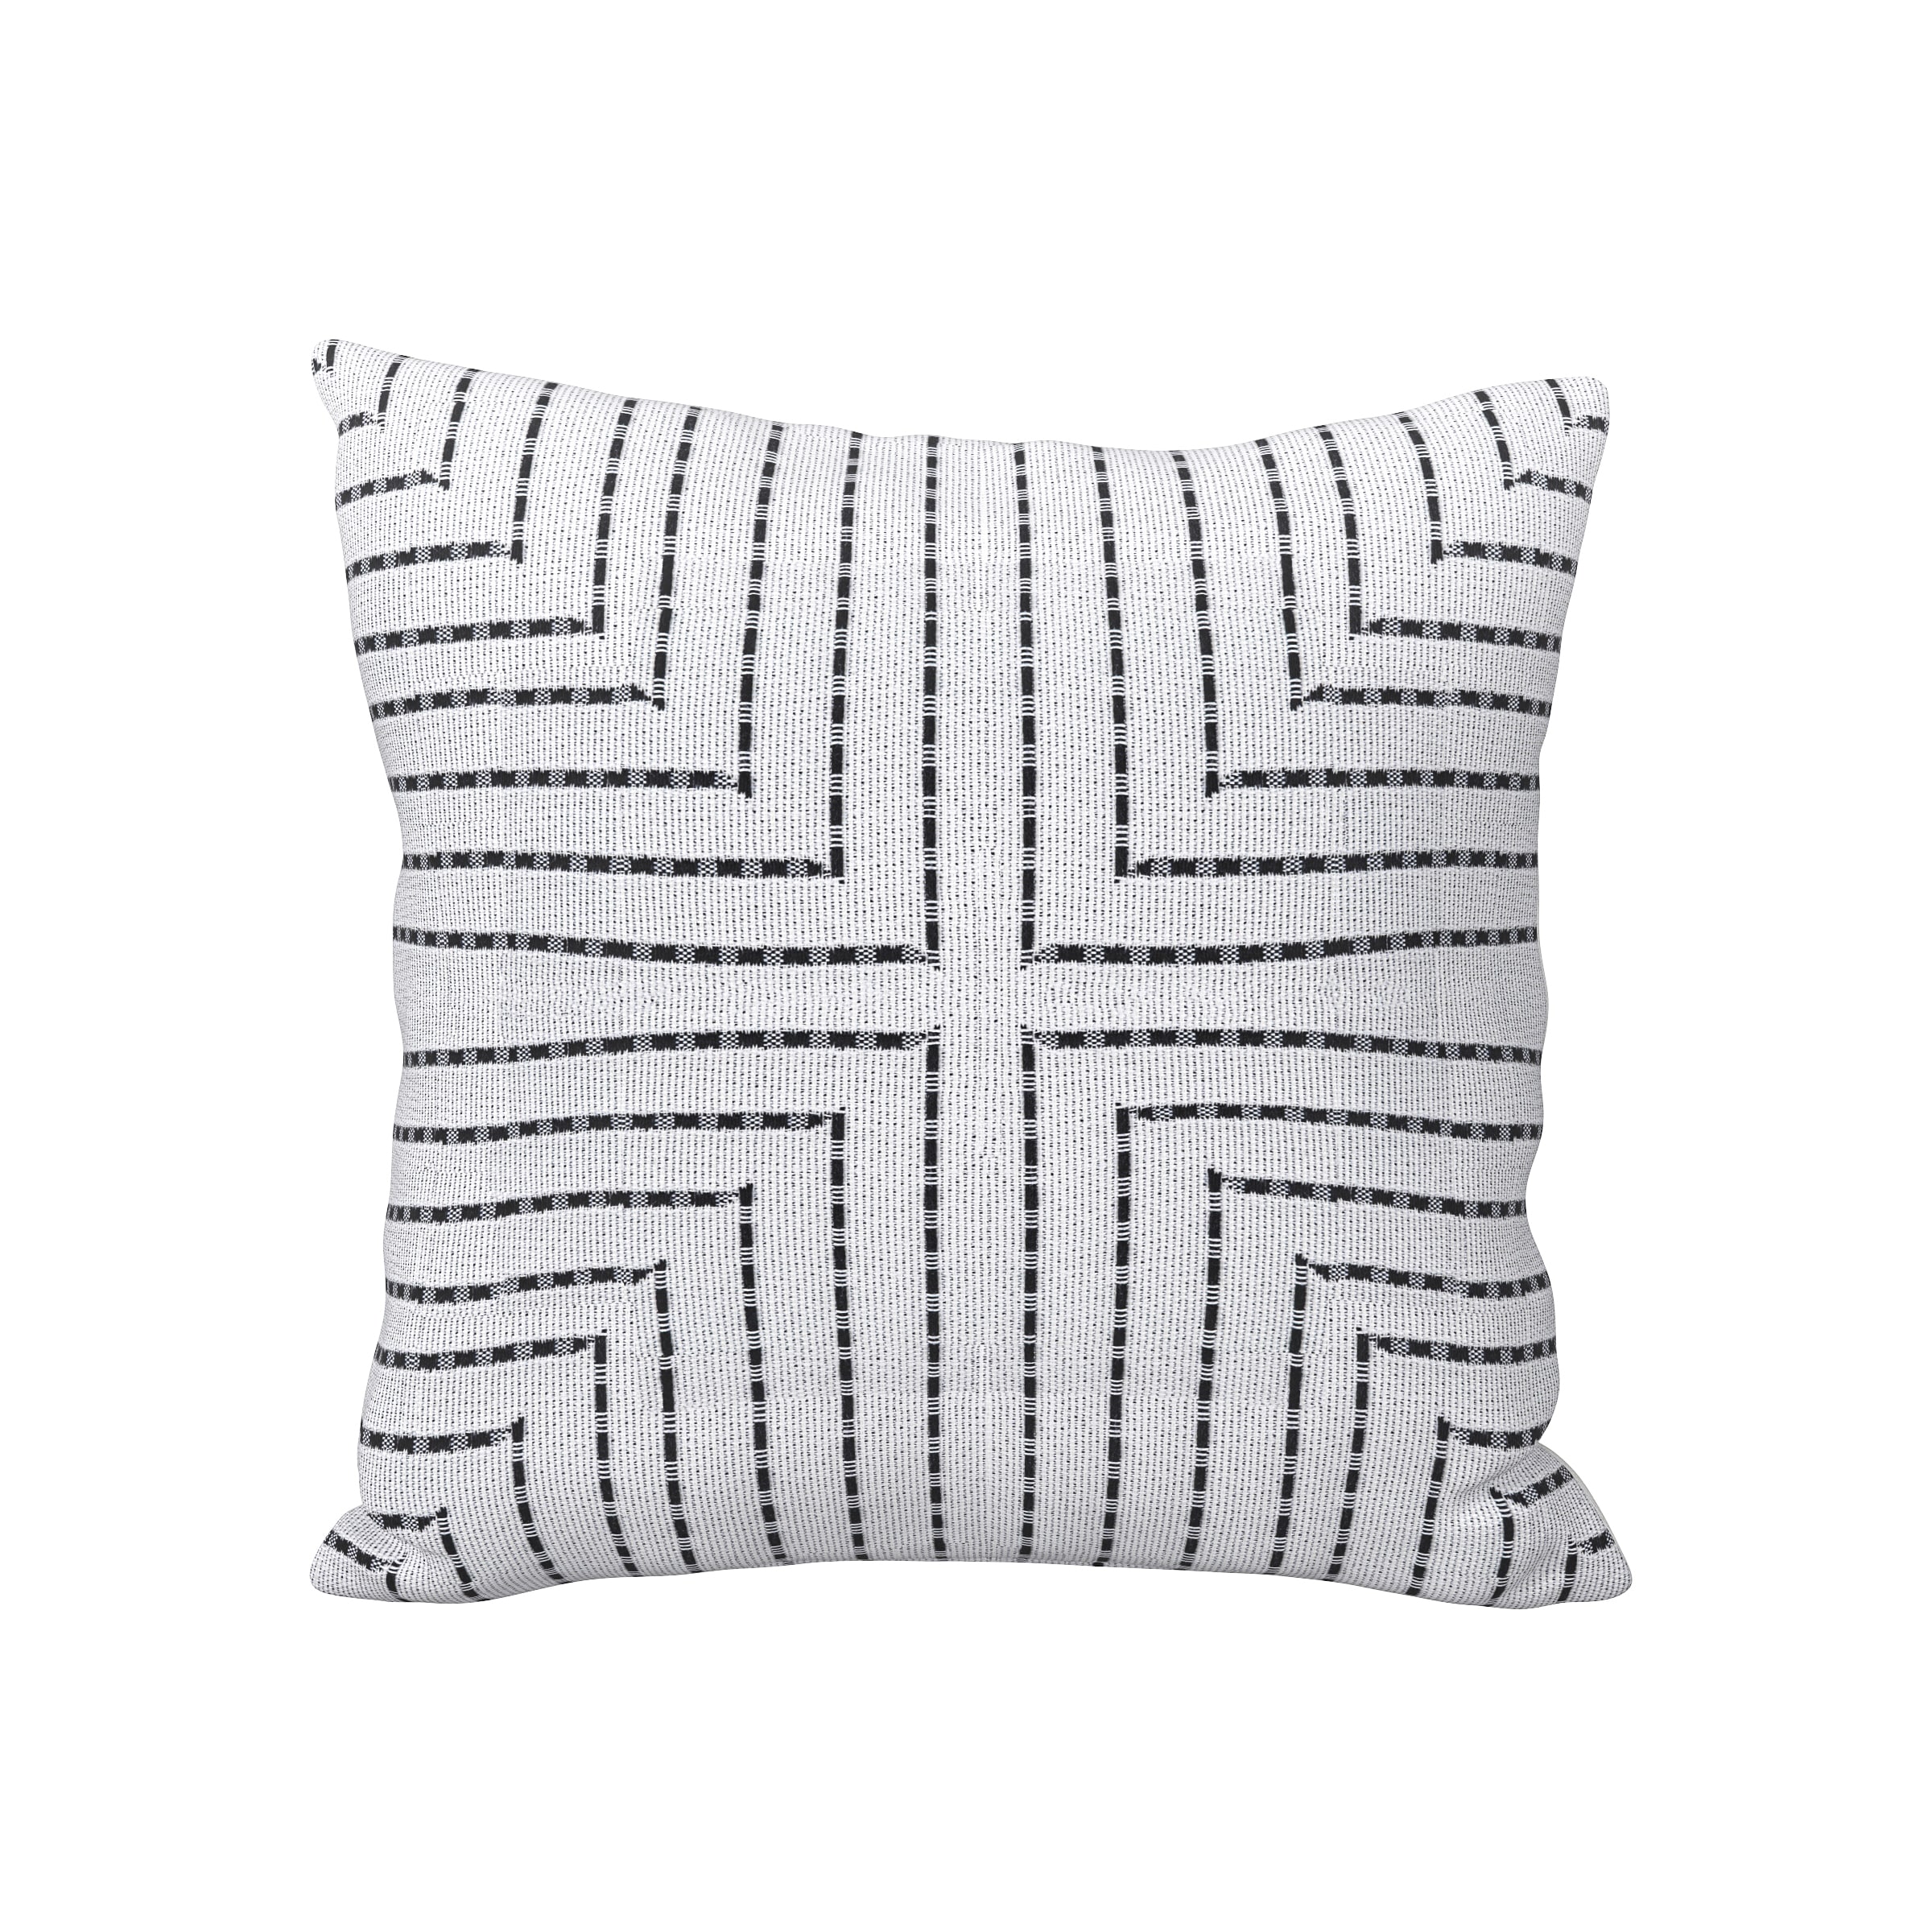 Soul by the Pound Square Pillow